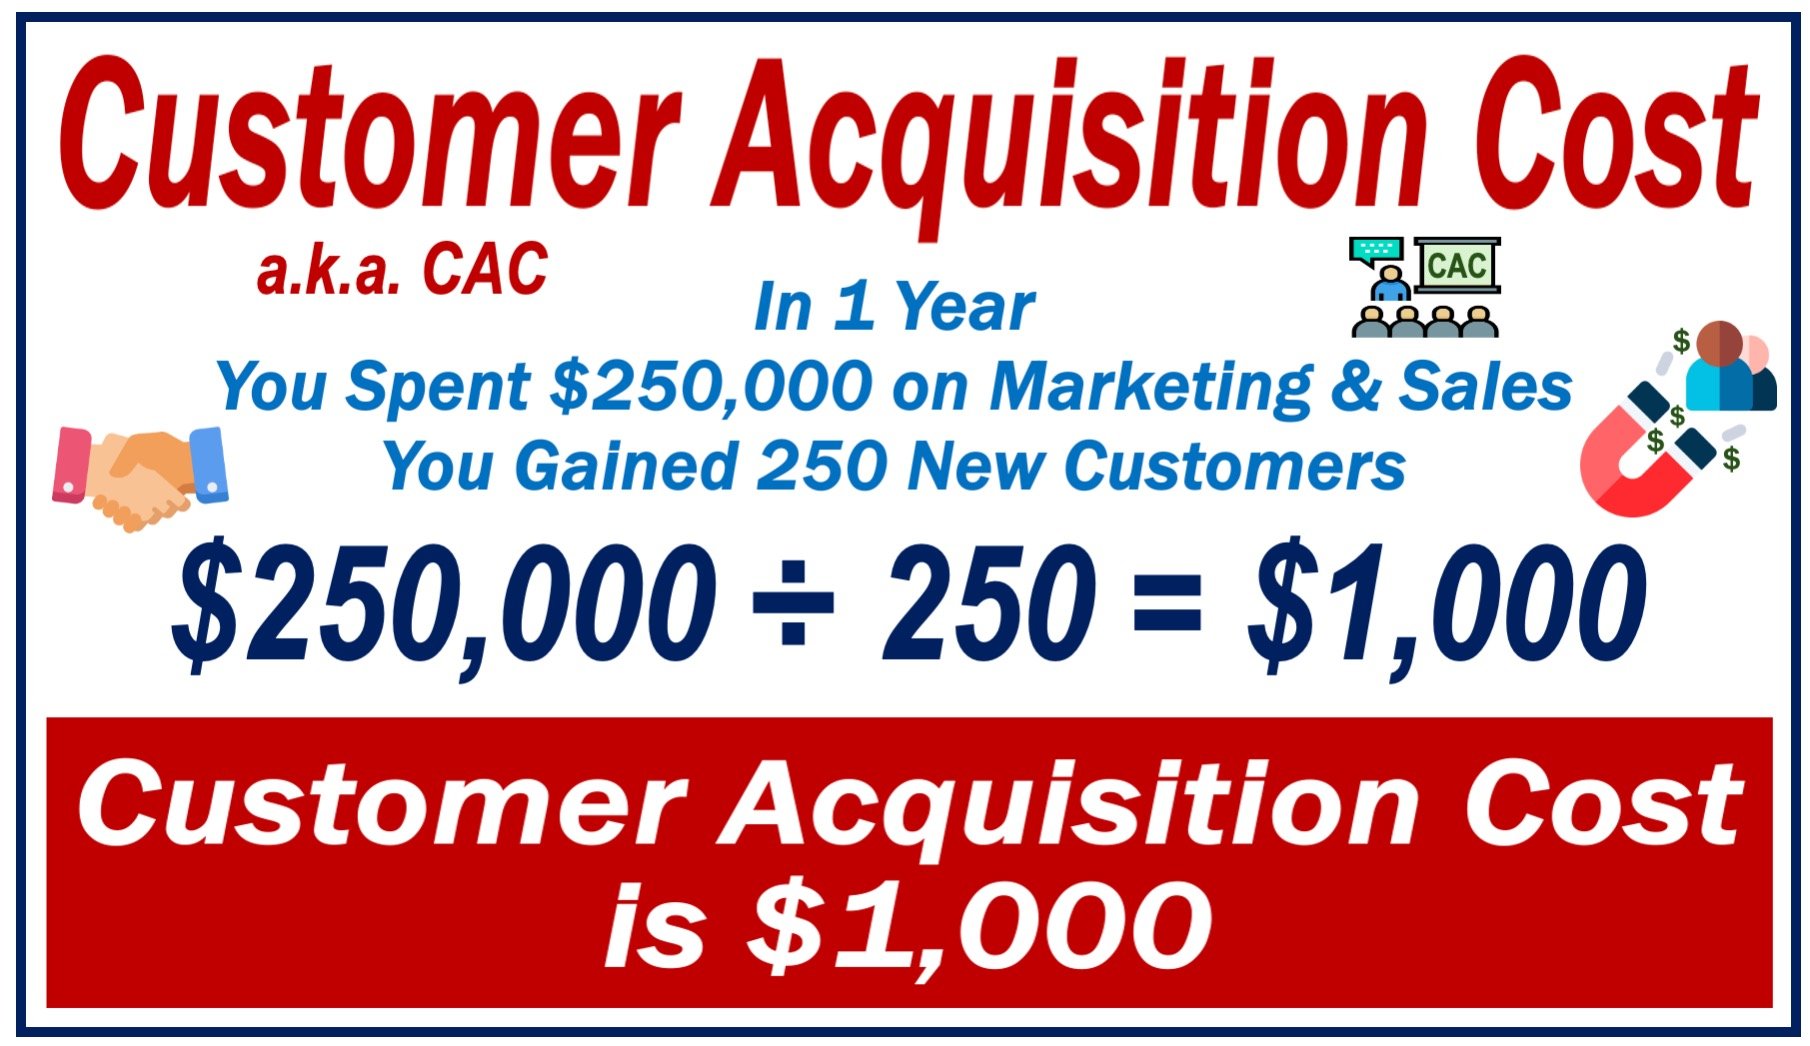 Image showing a Customer Acquisition Cost calculation.